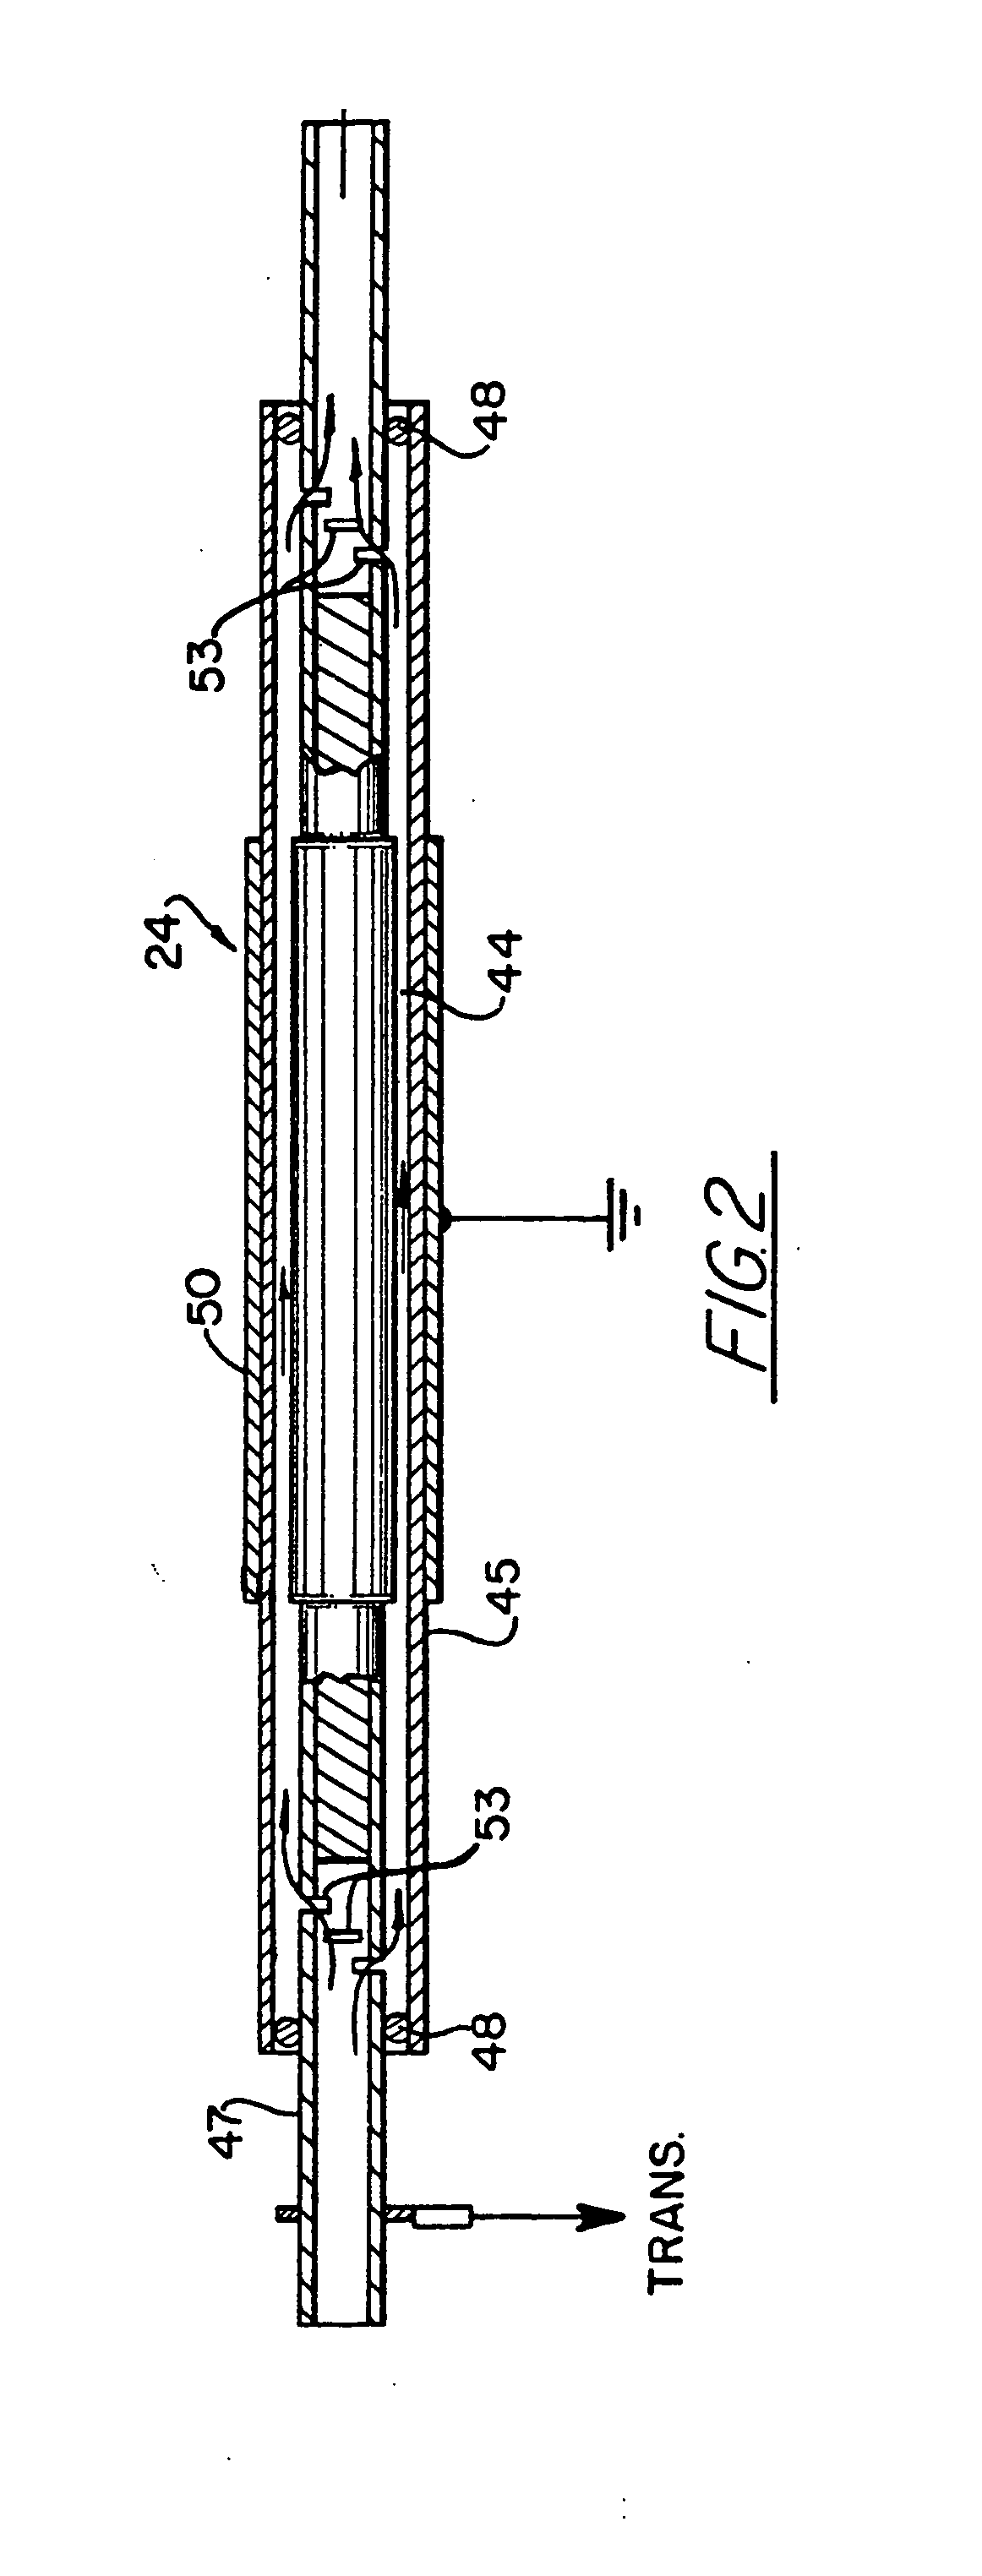 Methods for treatment of crops by an irrigation solution